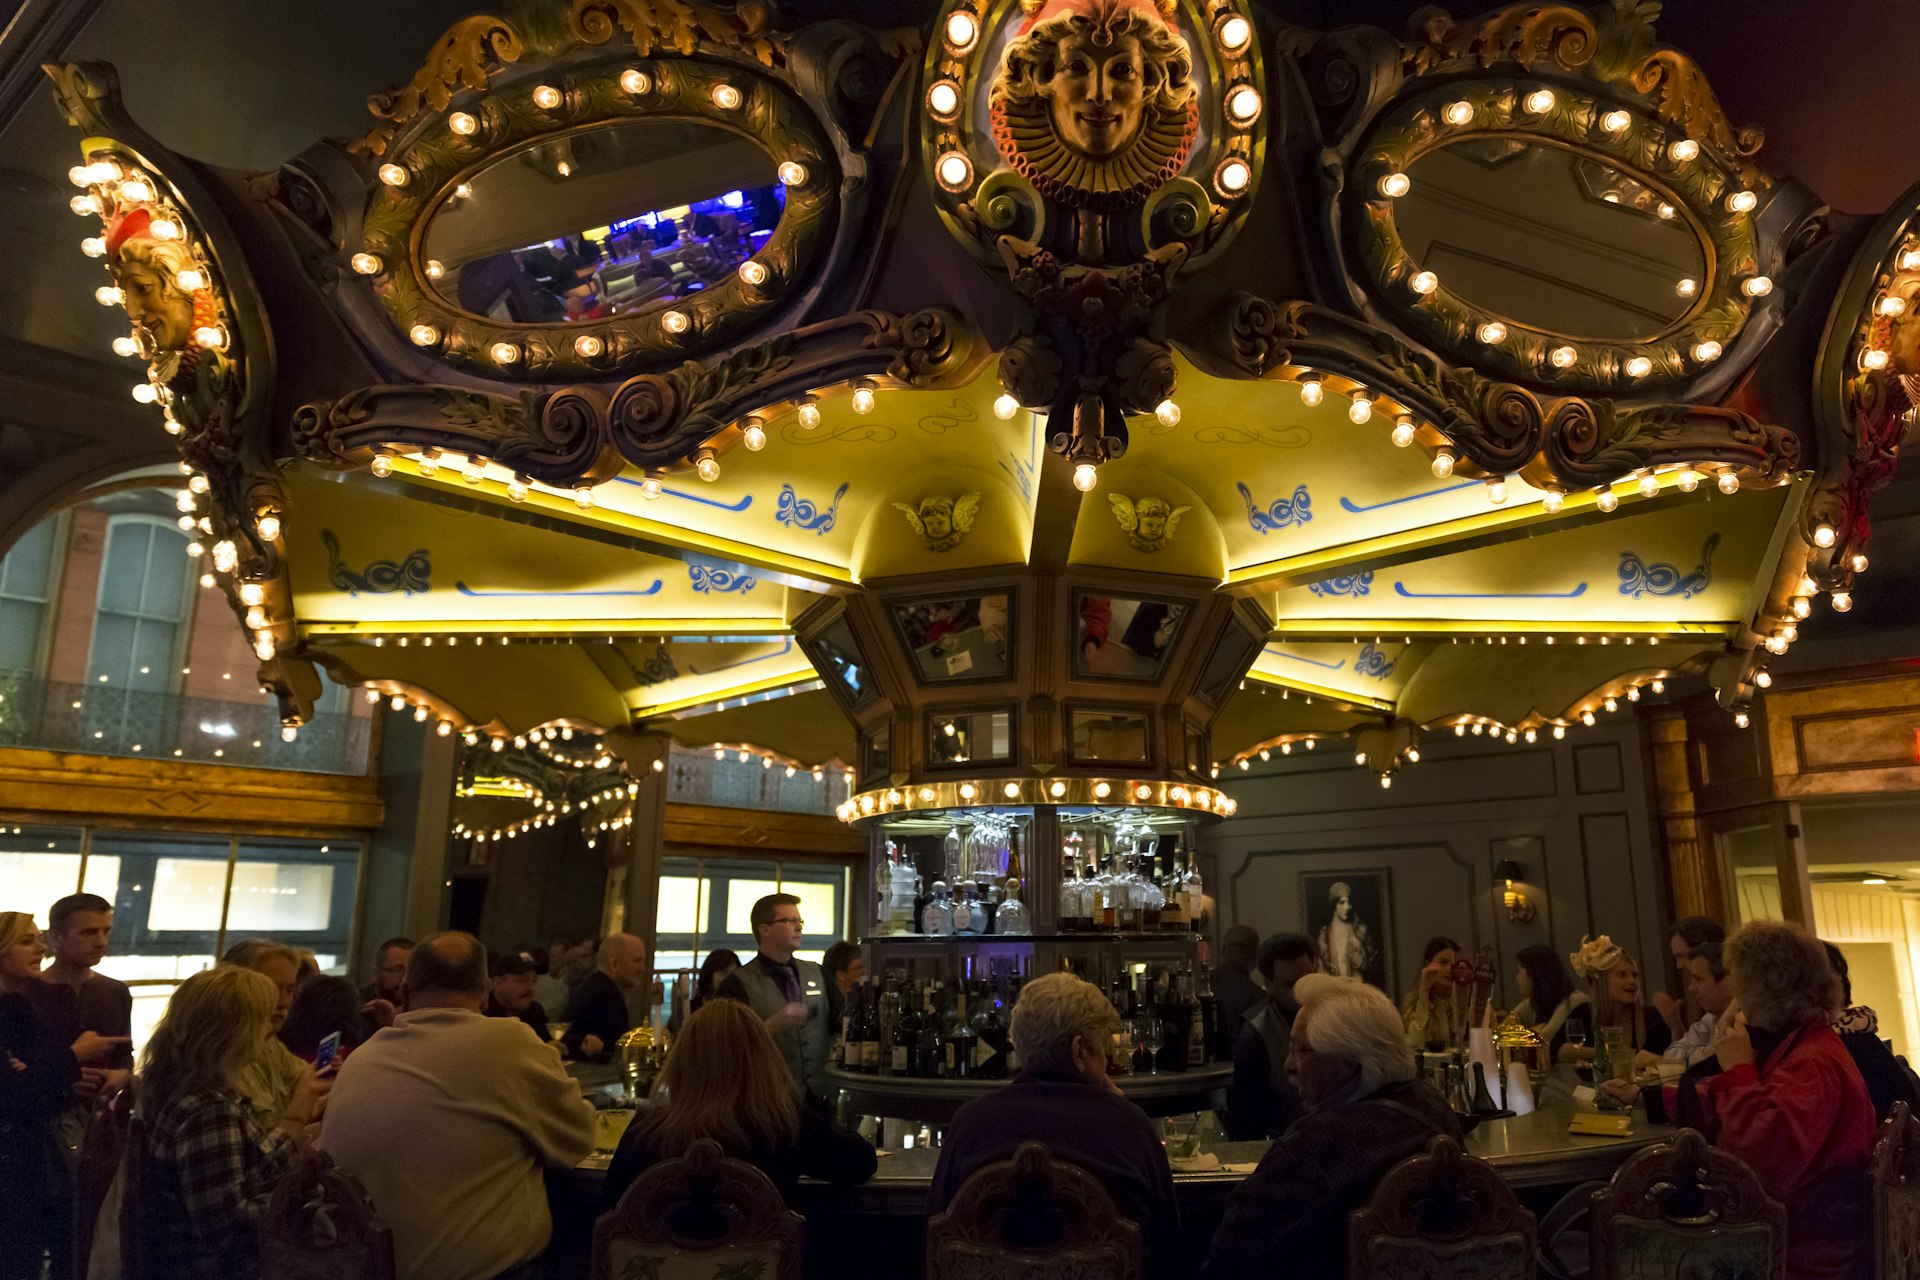 Visitors at the rotating bar at the Carousel Bar, Hotel Monteleone, French Quarter, New Orleans, Louisiana, USA